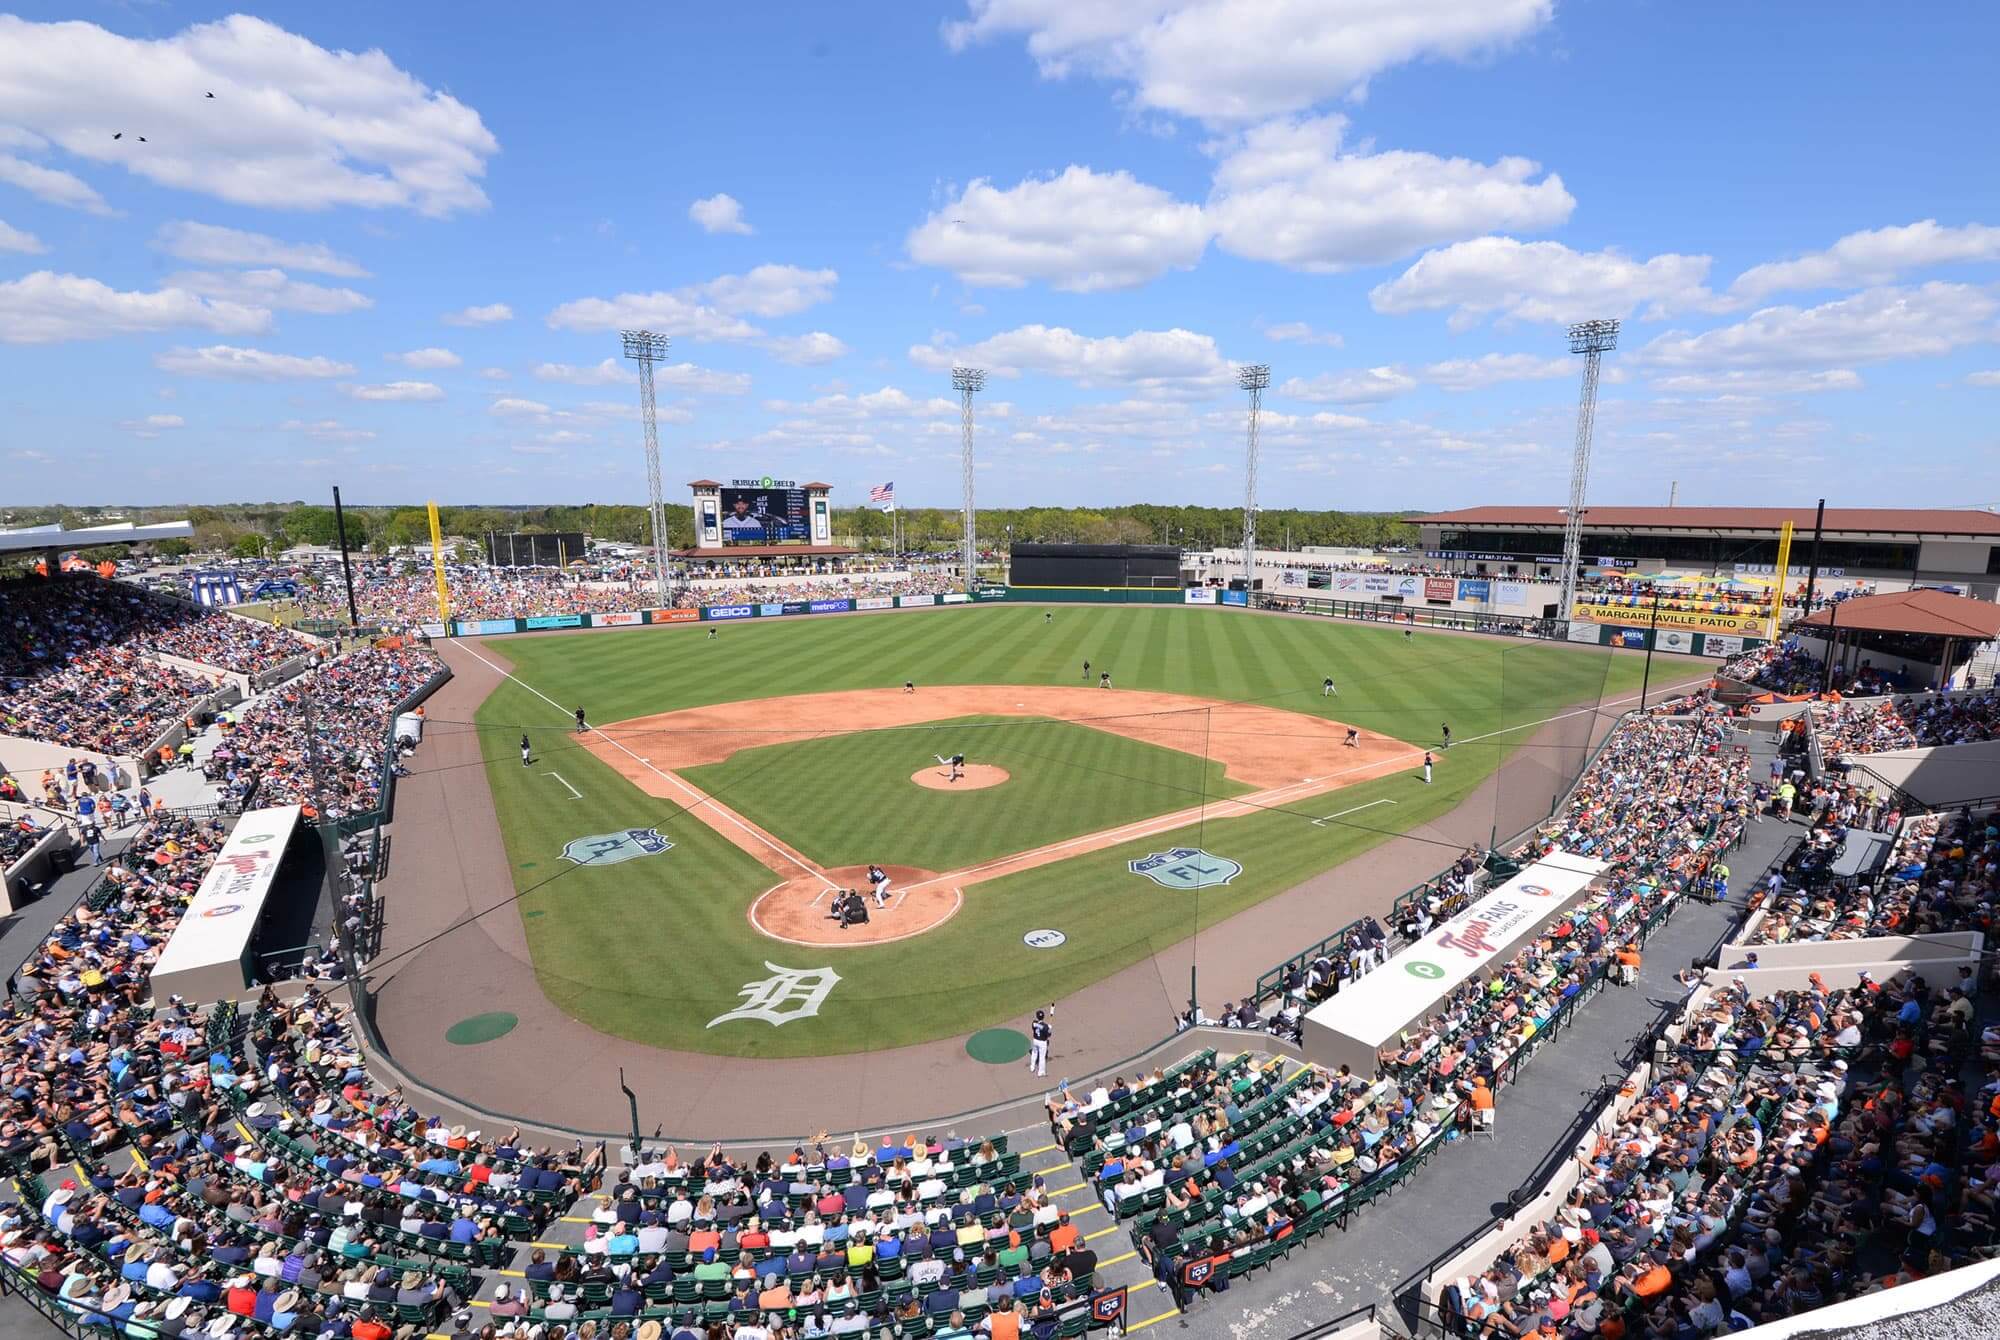 Aerial view of Publix Field at Joker Marchant Stadium during a Detroit Tigers Spring Training game in Lakeland, FL